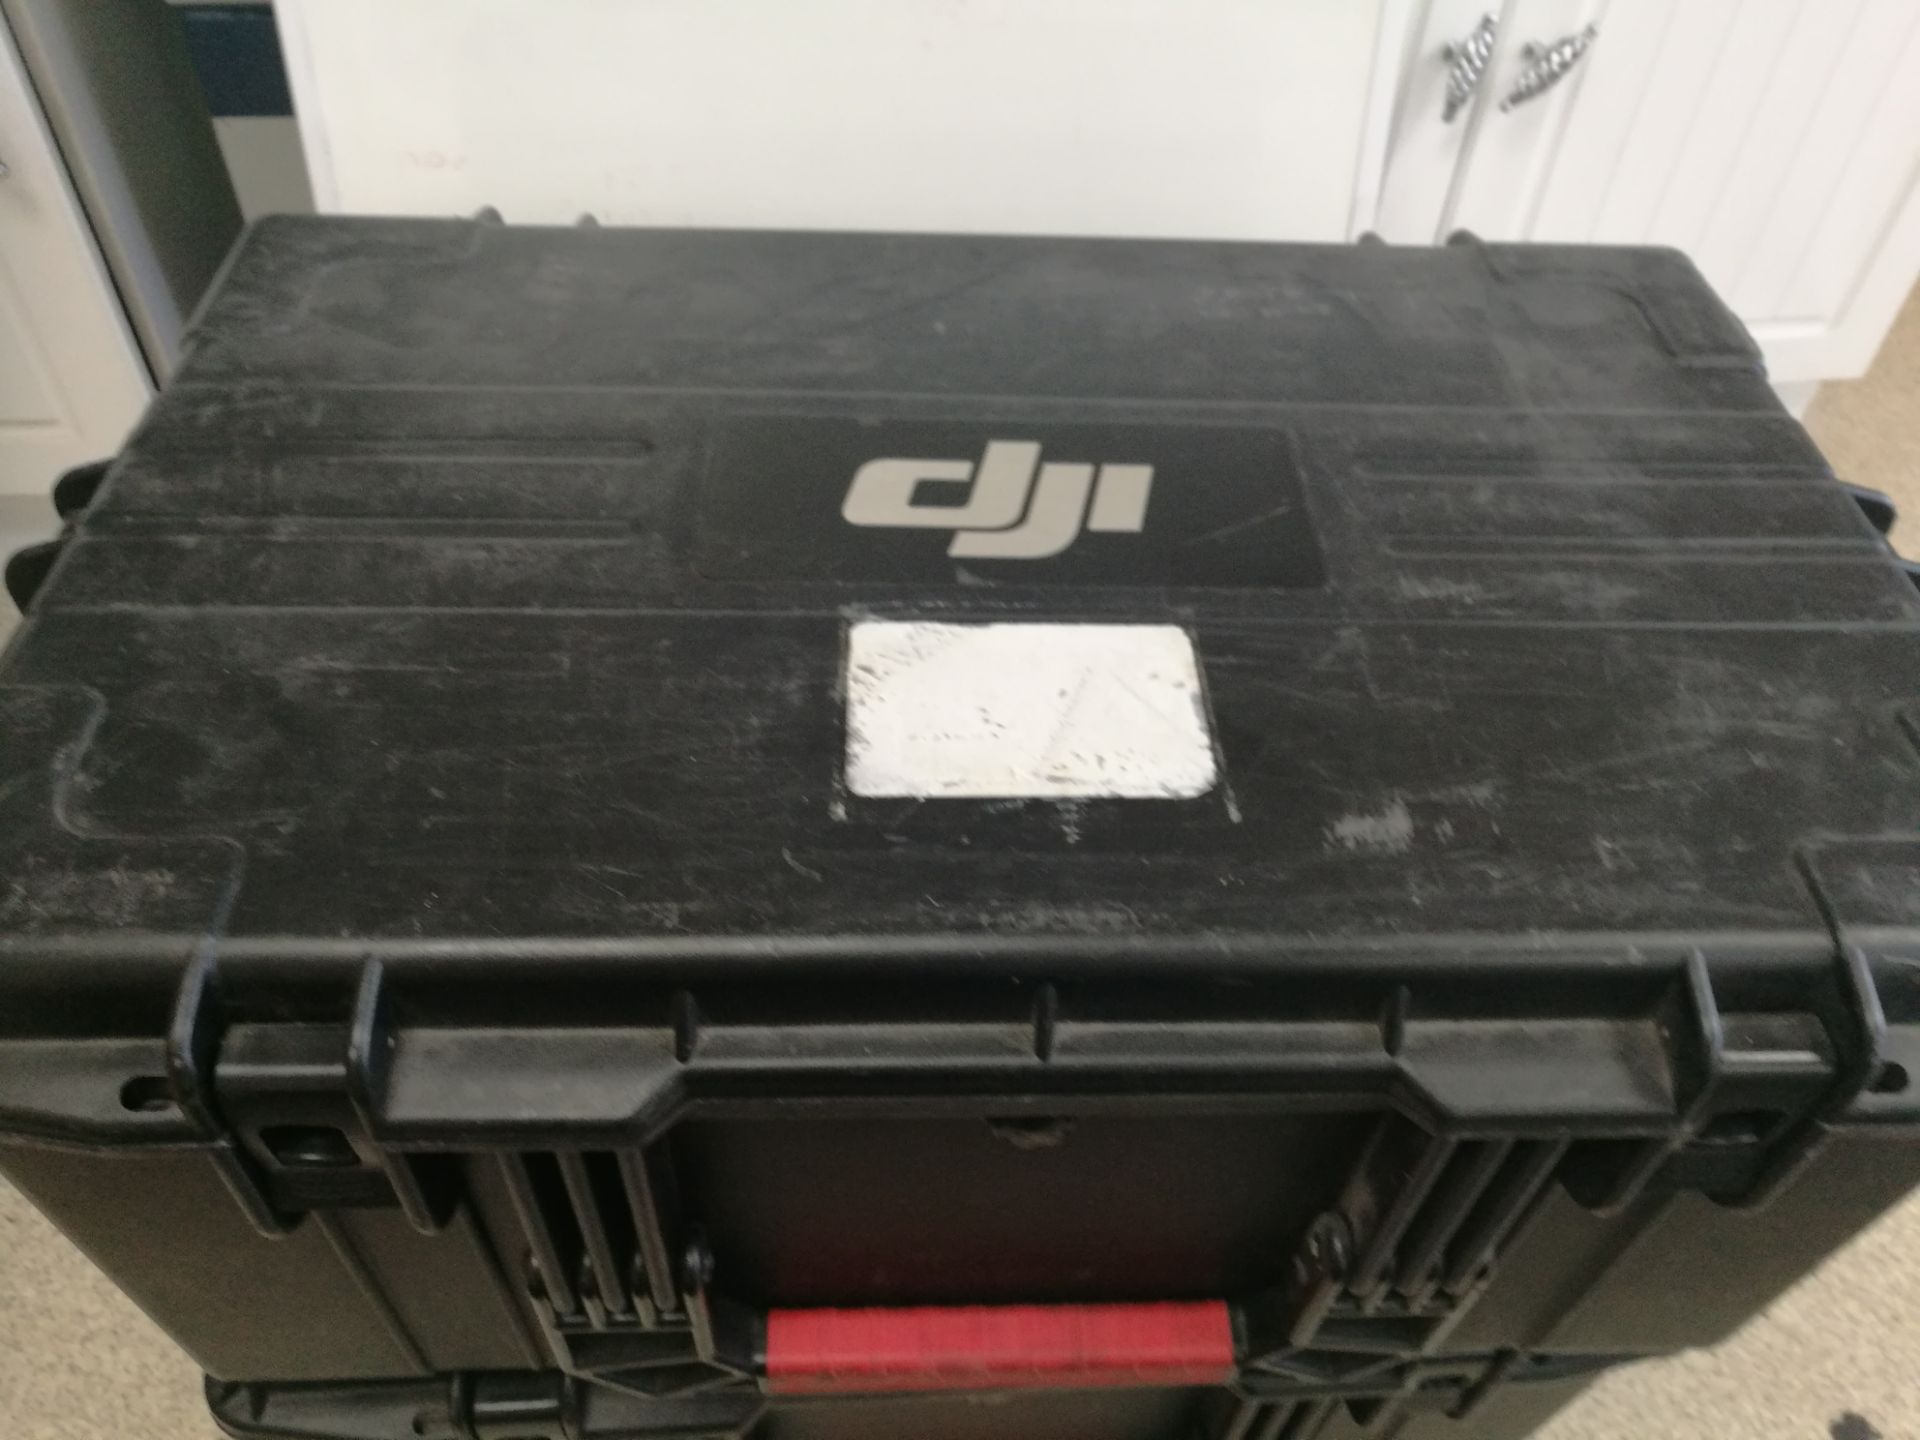 DJI Ronin 1 Gimbal w/ Extra Batteries, Grip & 2 x Cases - Image 6 of 6